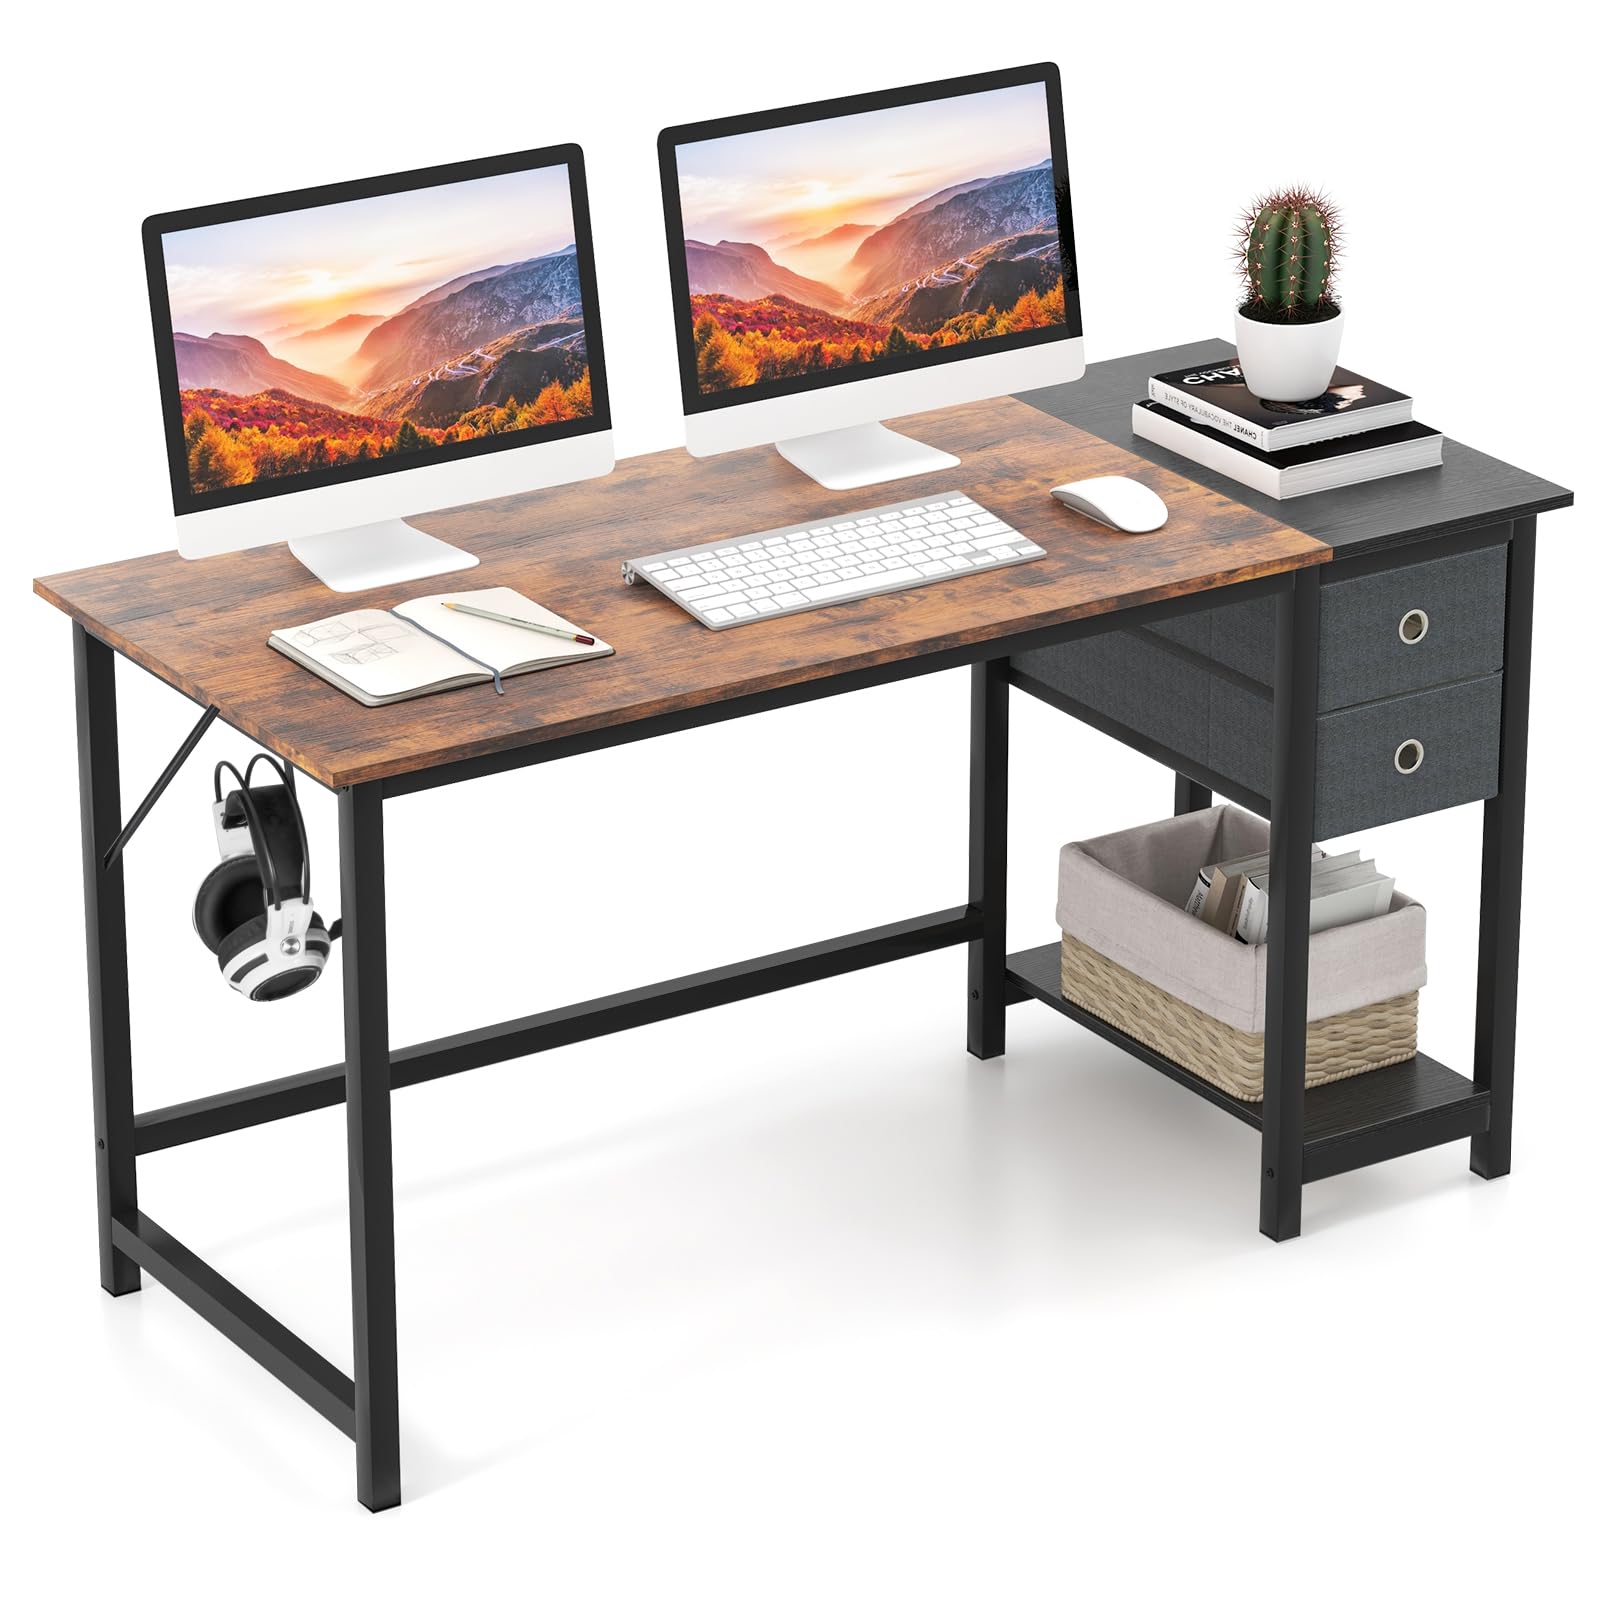 Giantex Computer Desk with Drawers